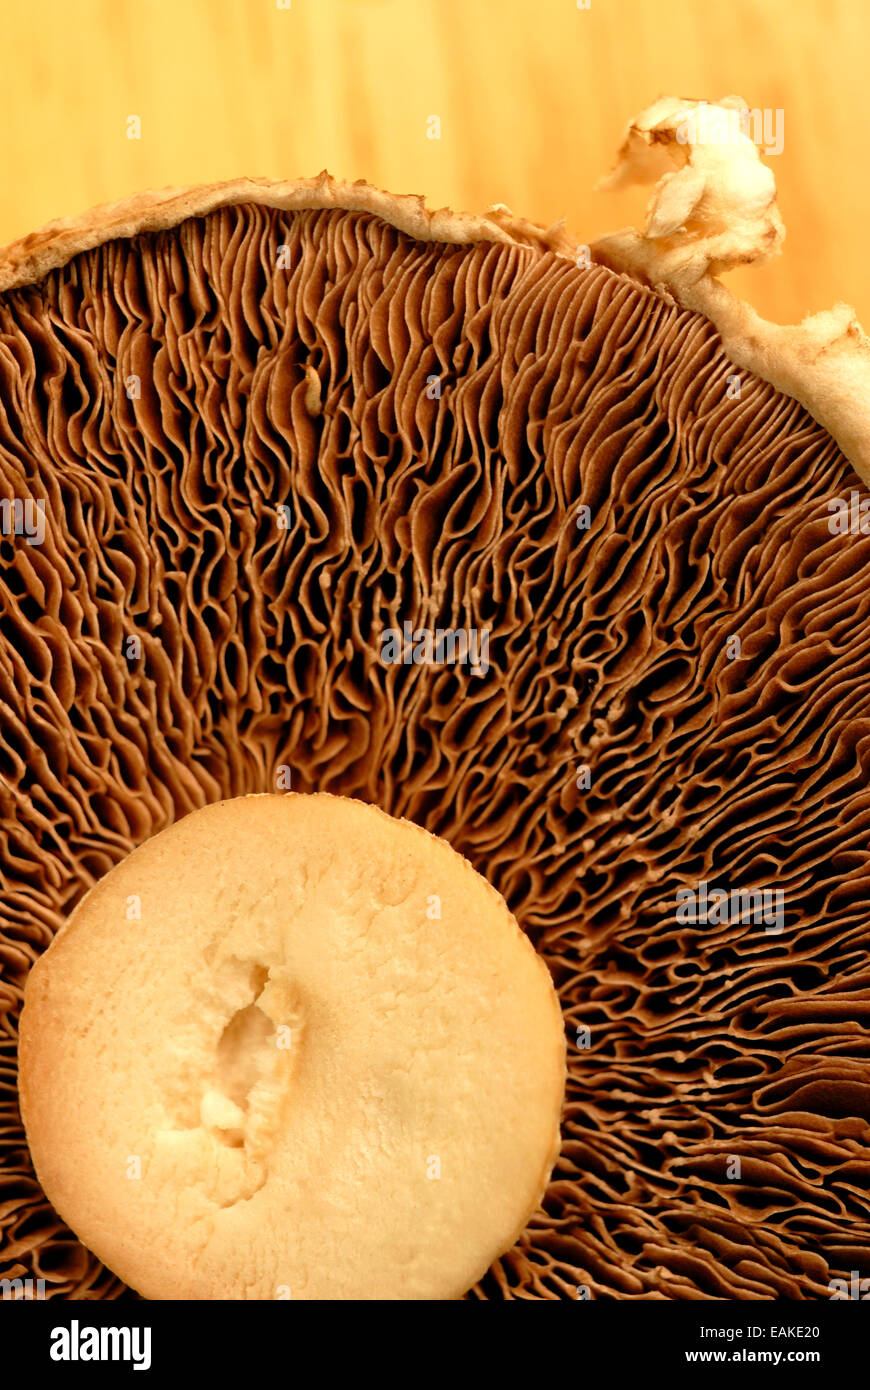 Underside of a field mushroom showing gills and cut stalk Stock Photo